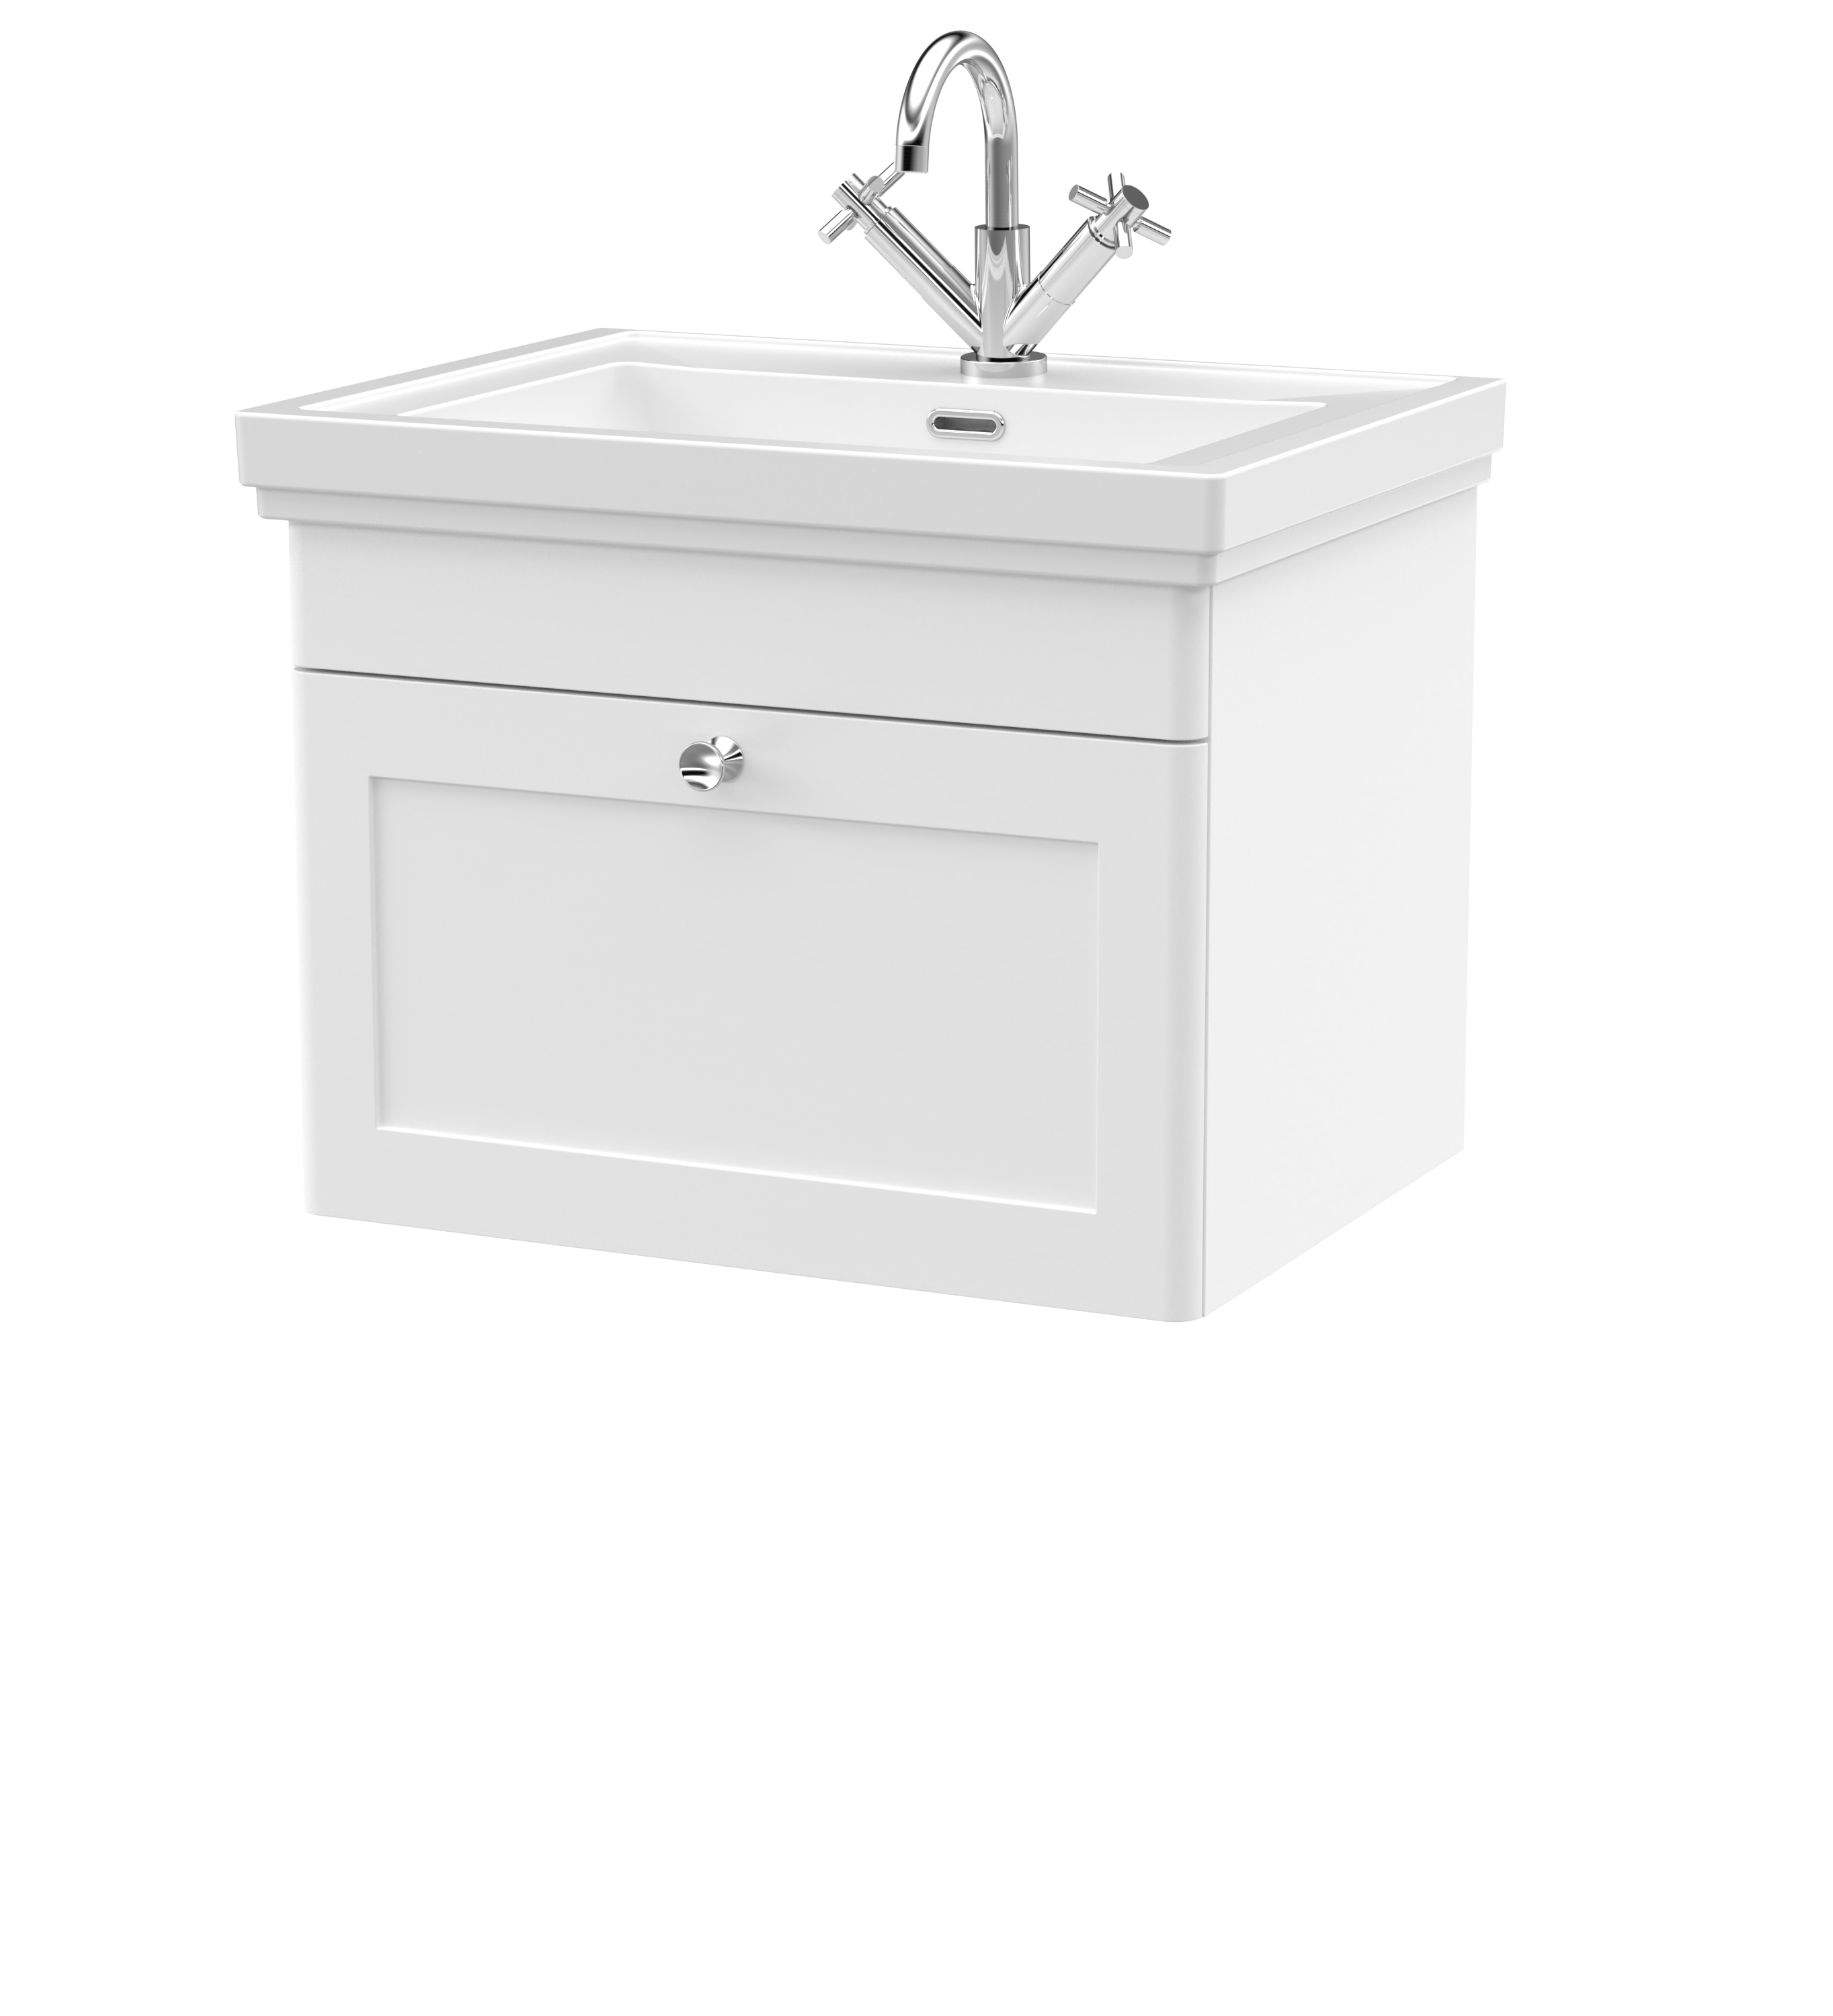 Nuie Classique 600mm Traditional Wall Mounted Vanity Unit & Basin - Satin White